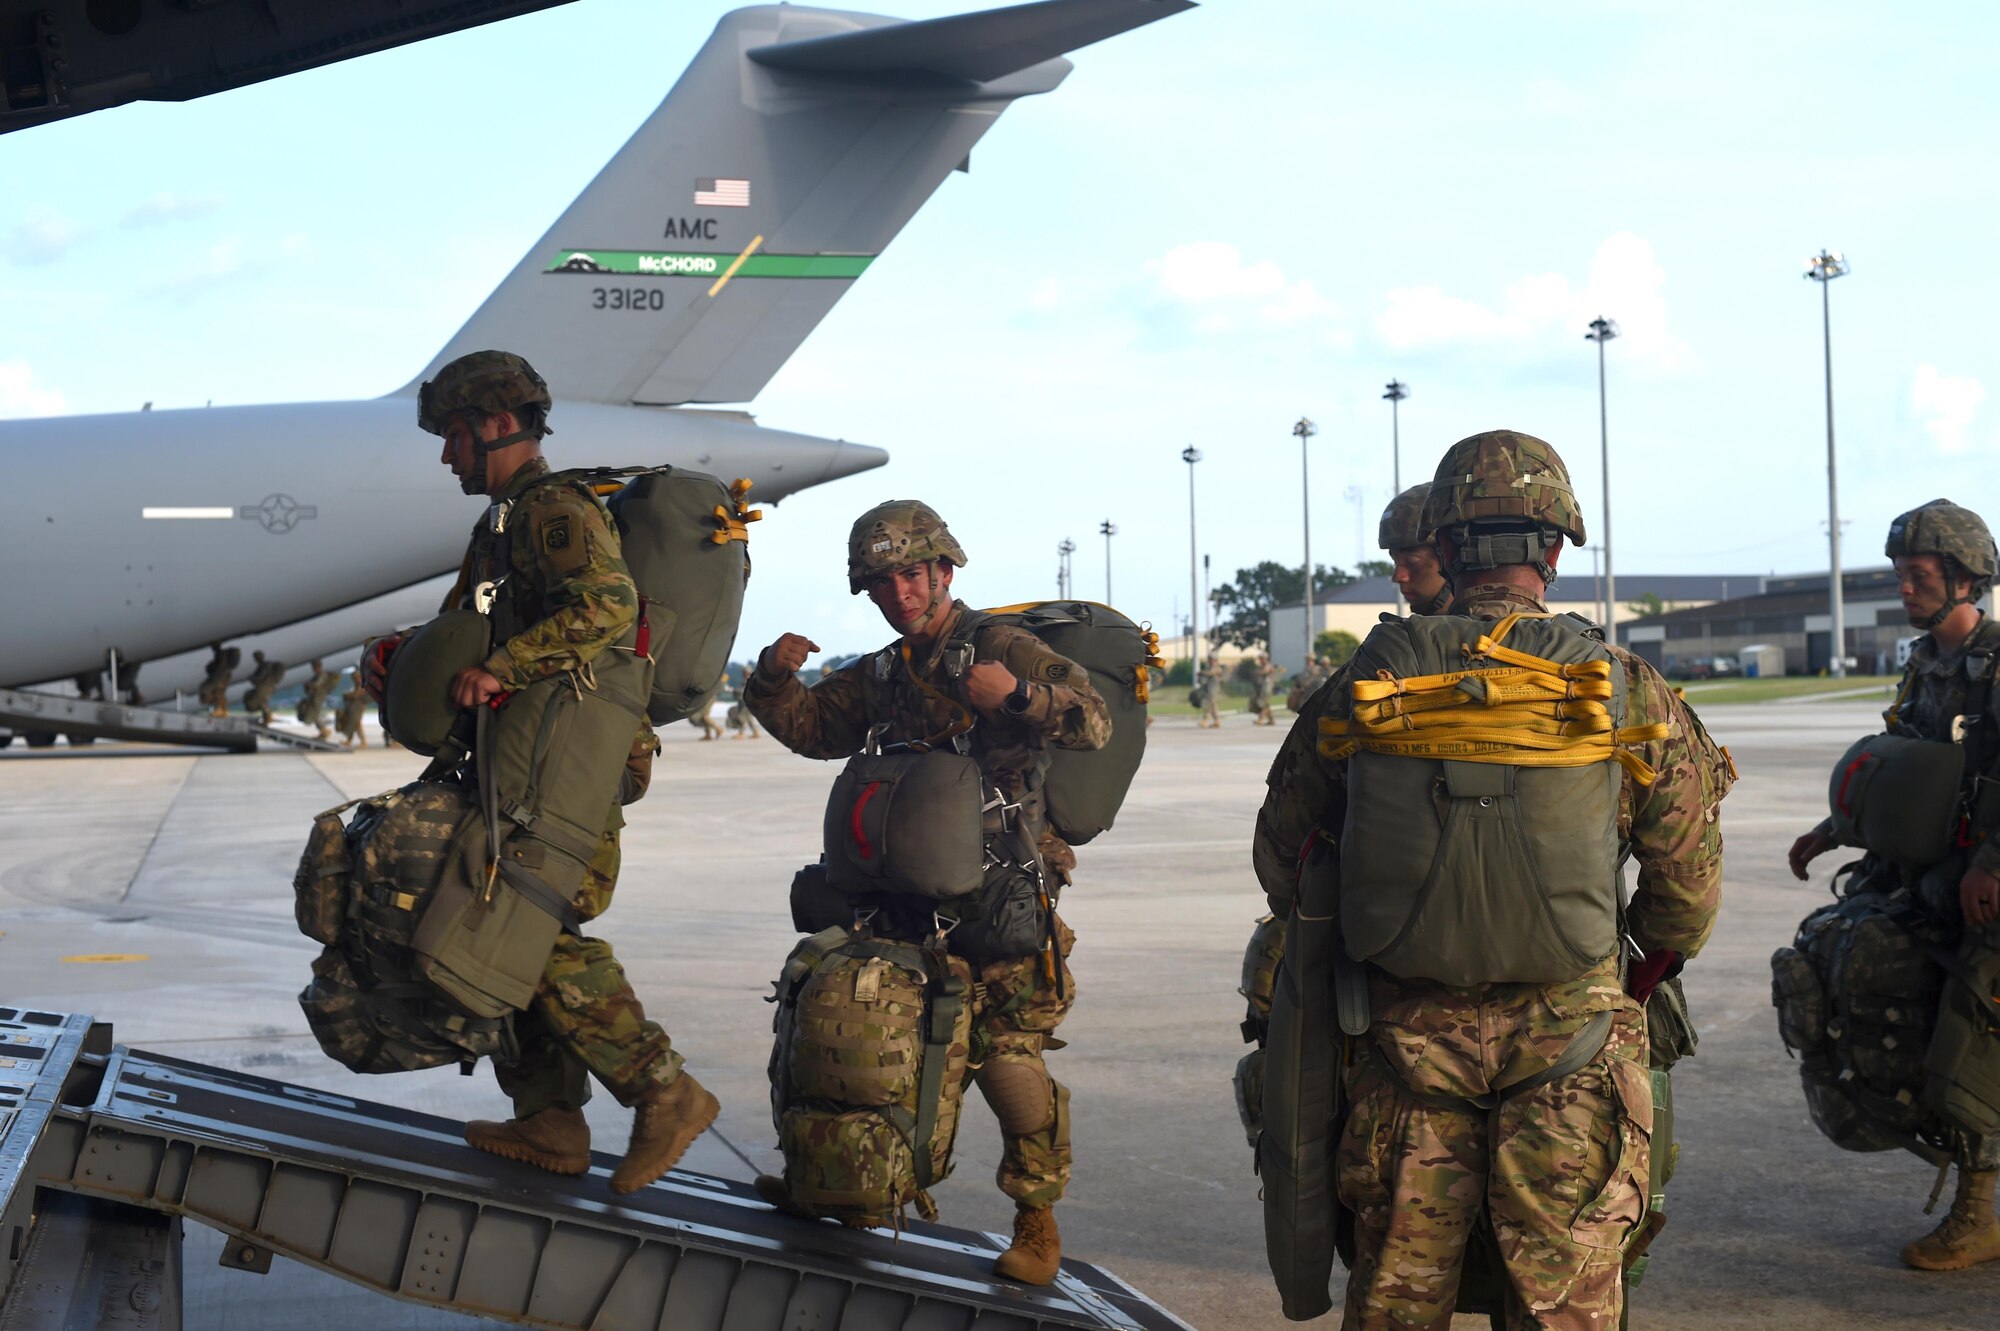 Soldiers with the 82nd Airborne Division board a 62nd Airlift Wing C-17 Globemaster III at Pope Army Air Field, North Carolina, June 4, 2016. More than 90 Soldiers boarded three C-17’s from Joint Base Lewis-McChord, Washington. (U.S. Air Force photo/Staff Sgt. Naomi Shipley)